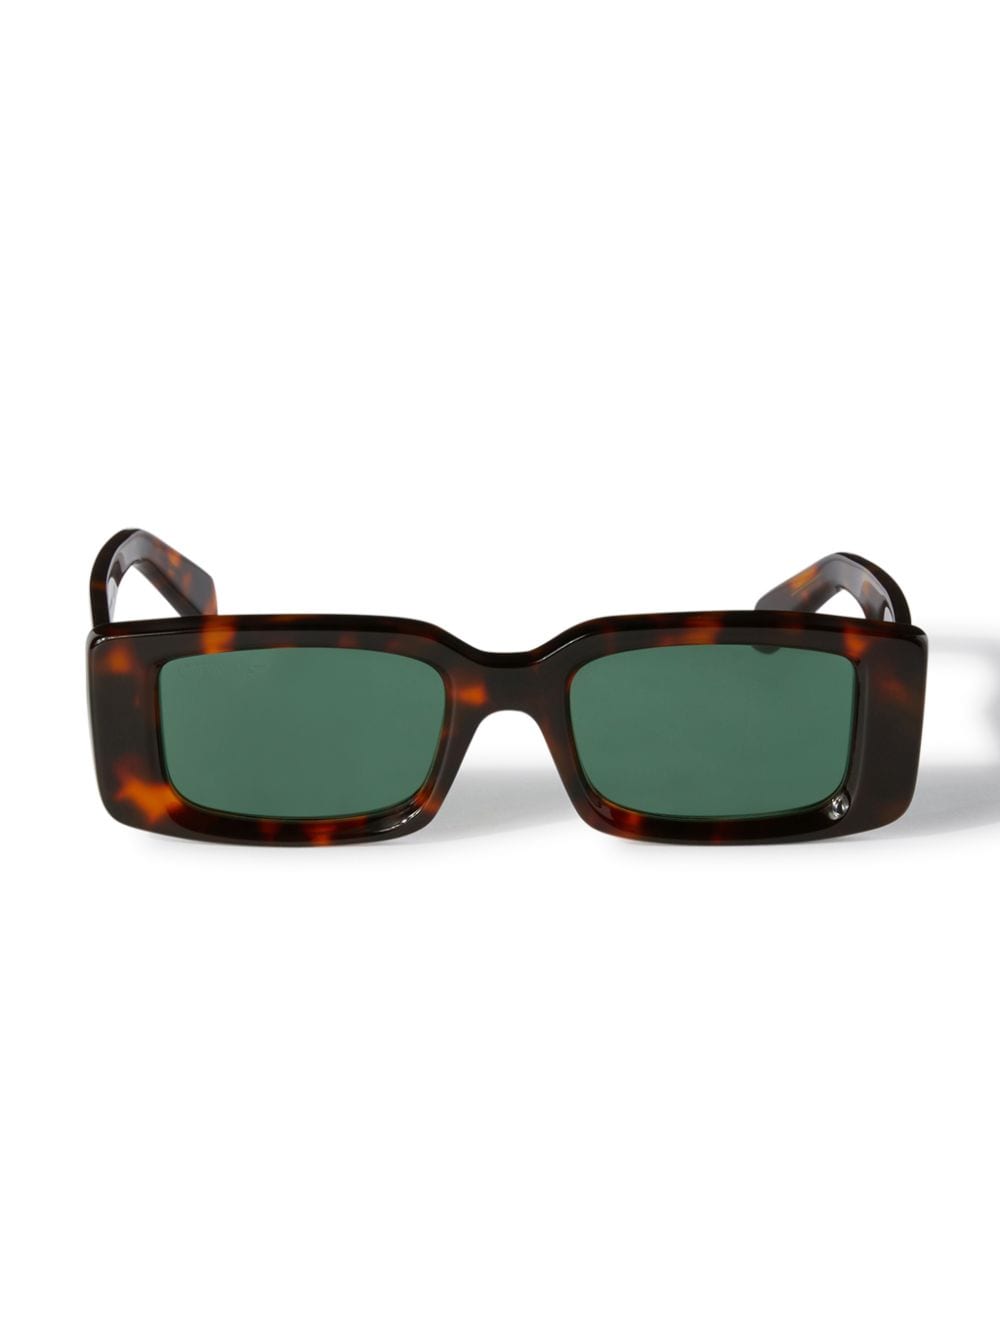 Arthur Sunglasses in Official green PN Off-White™ 